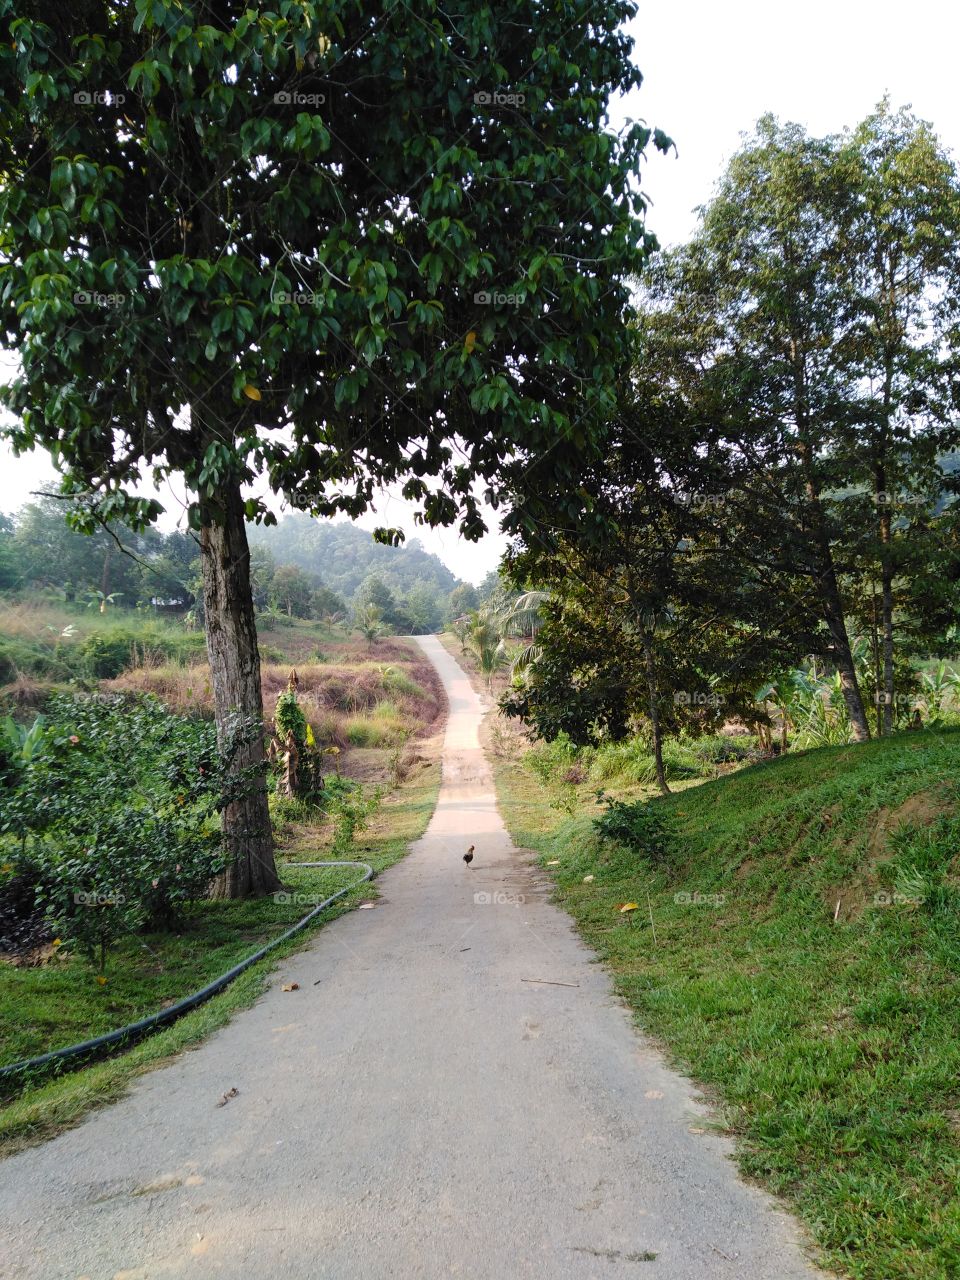 One of the road in a village with a green scenery.